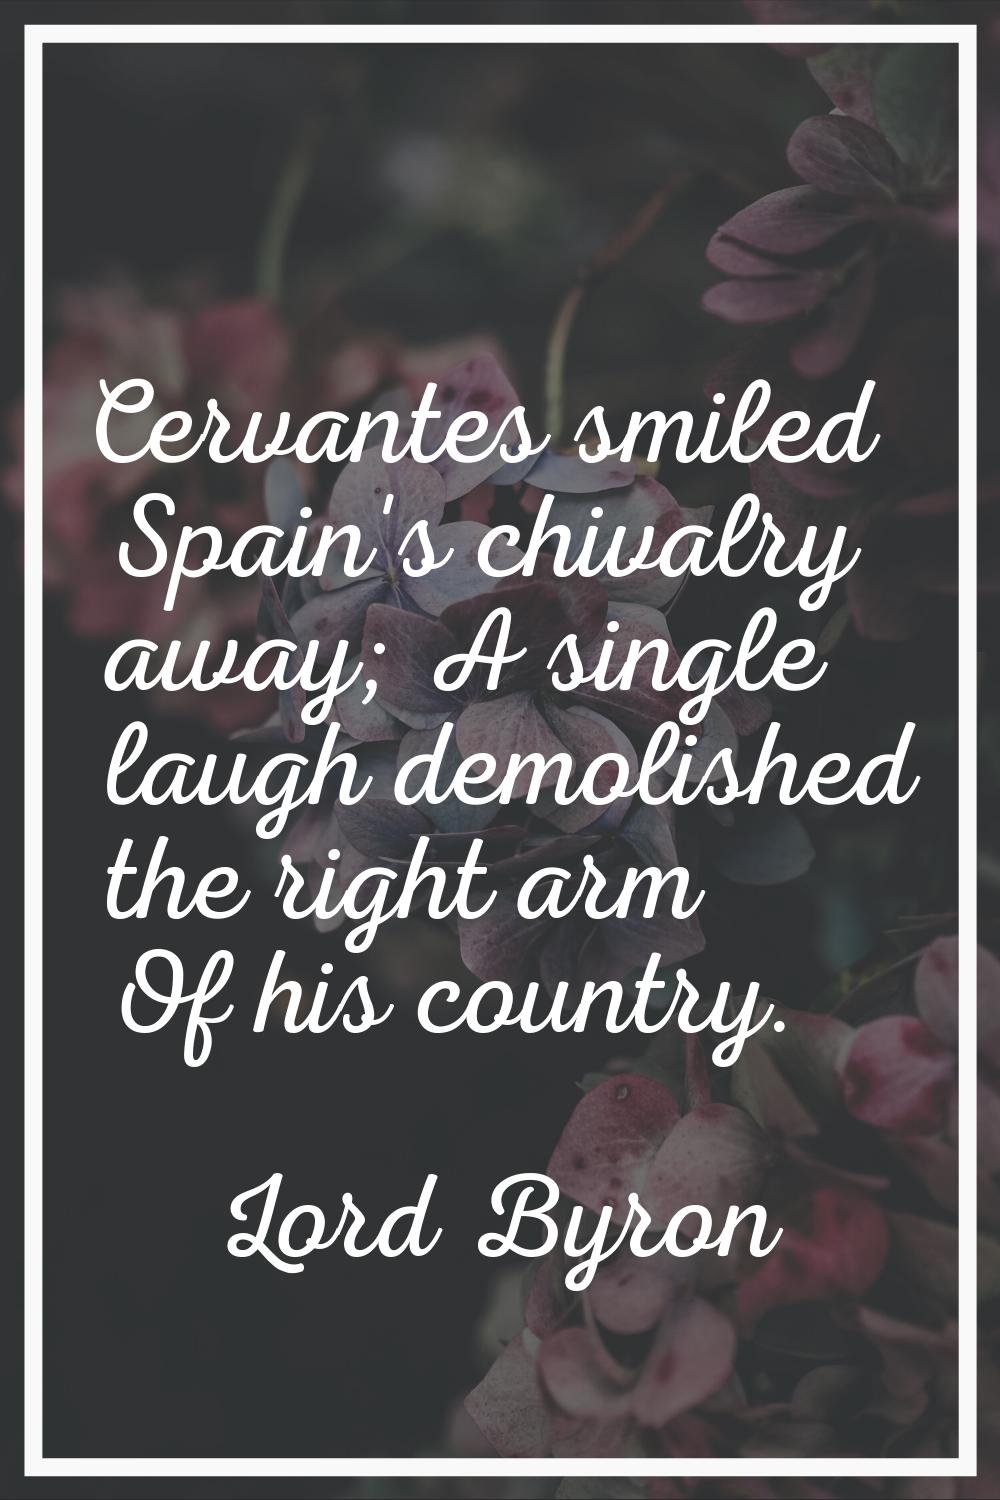 Cervantes smiled Spain's chivalry away; A single laugh demolished the right arm Of his country.